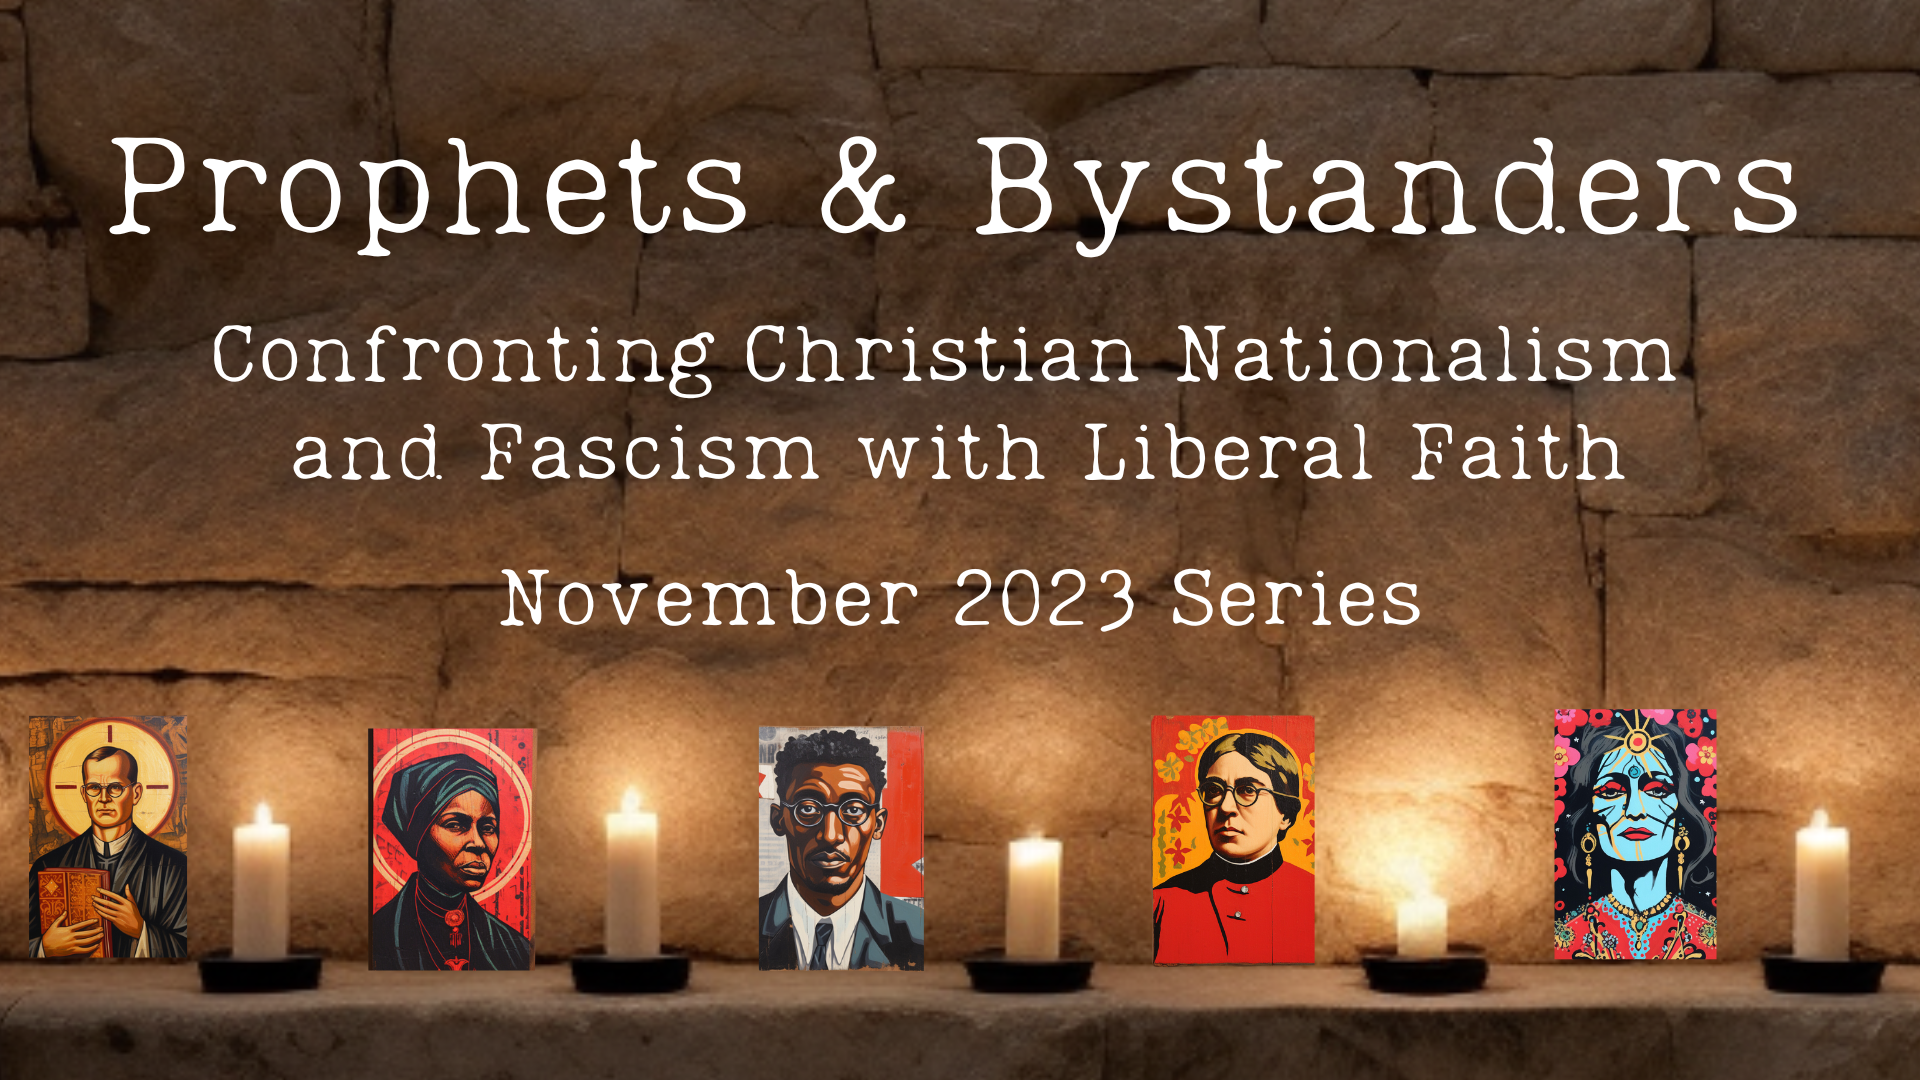 Prophets and Bystanders Series Invitation: November 2023